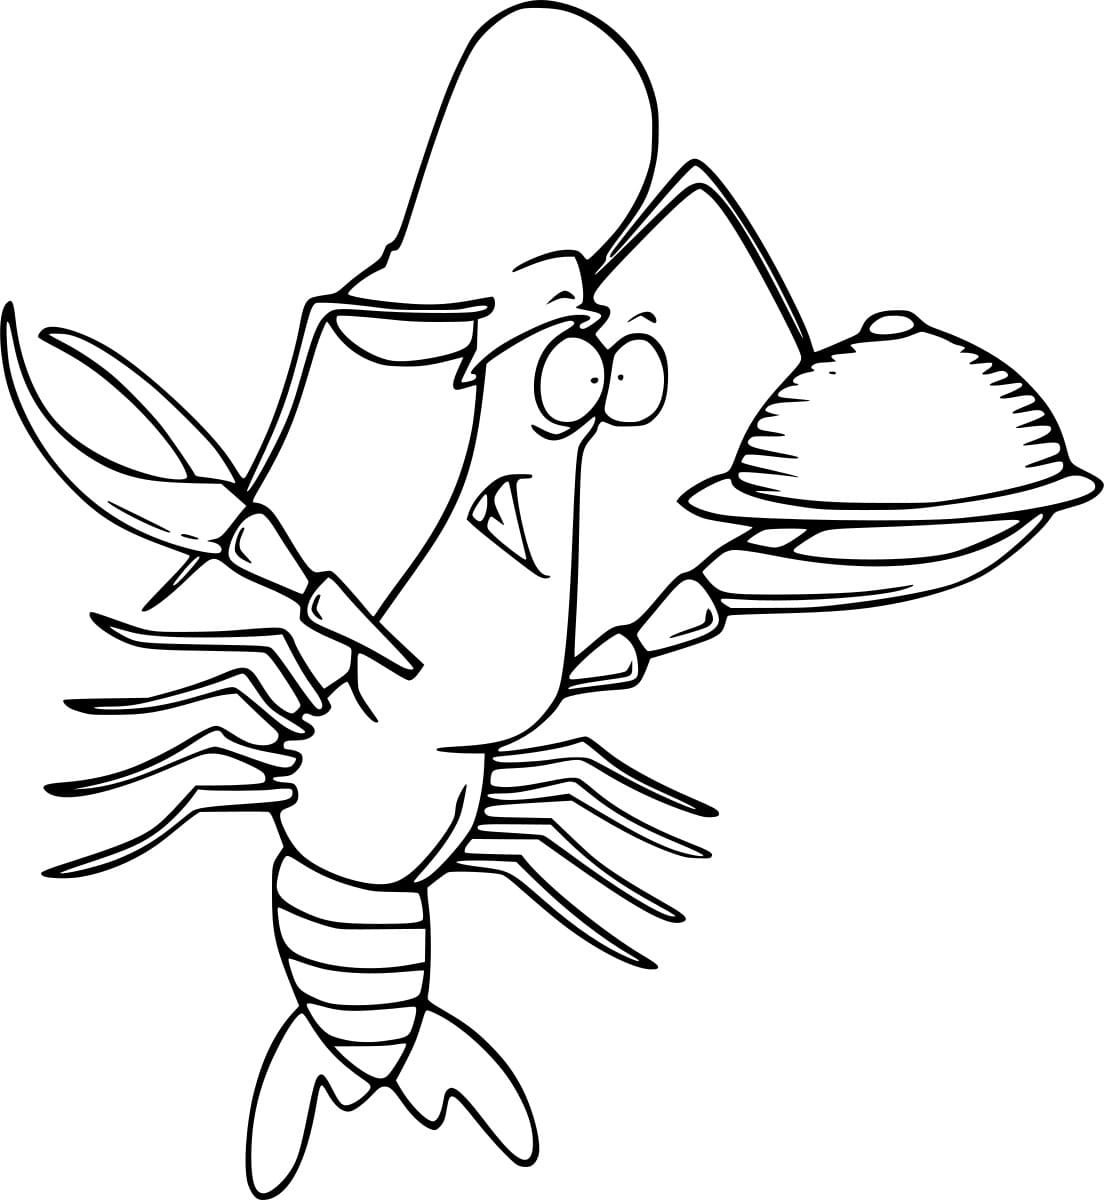 Lobster Chef Coloring Page